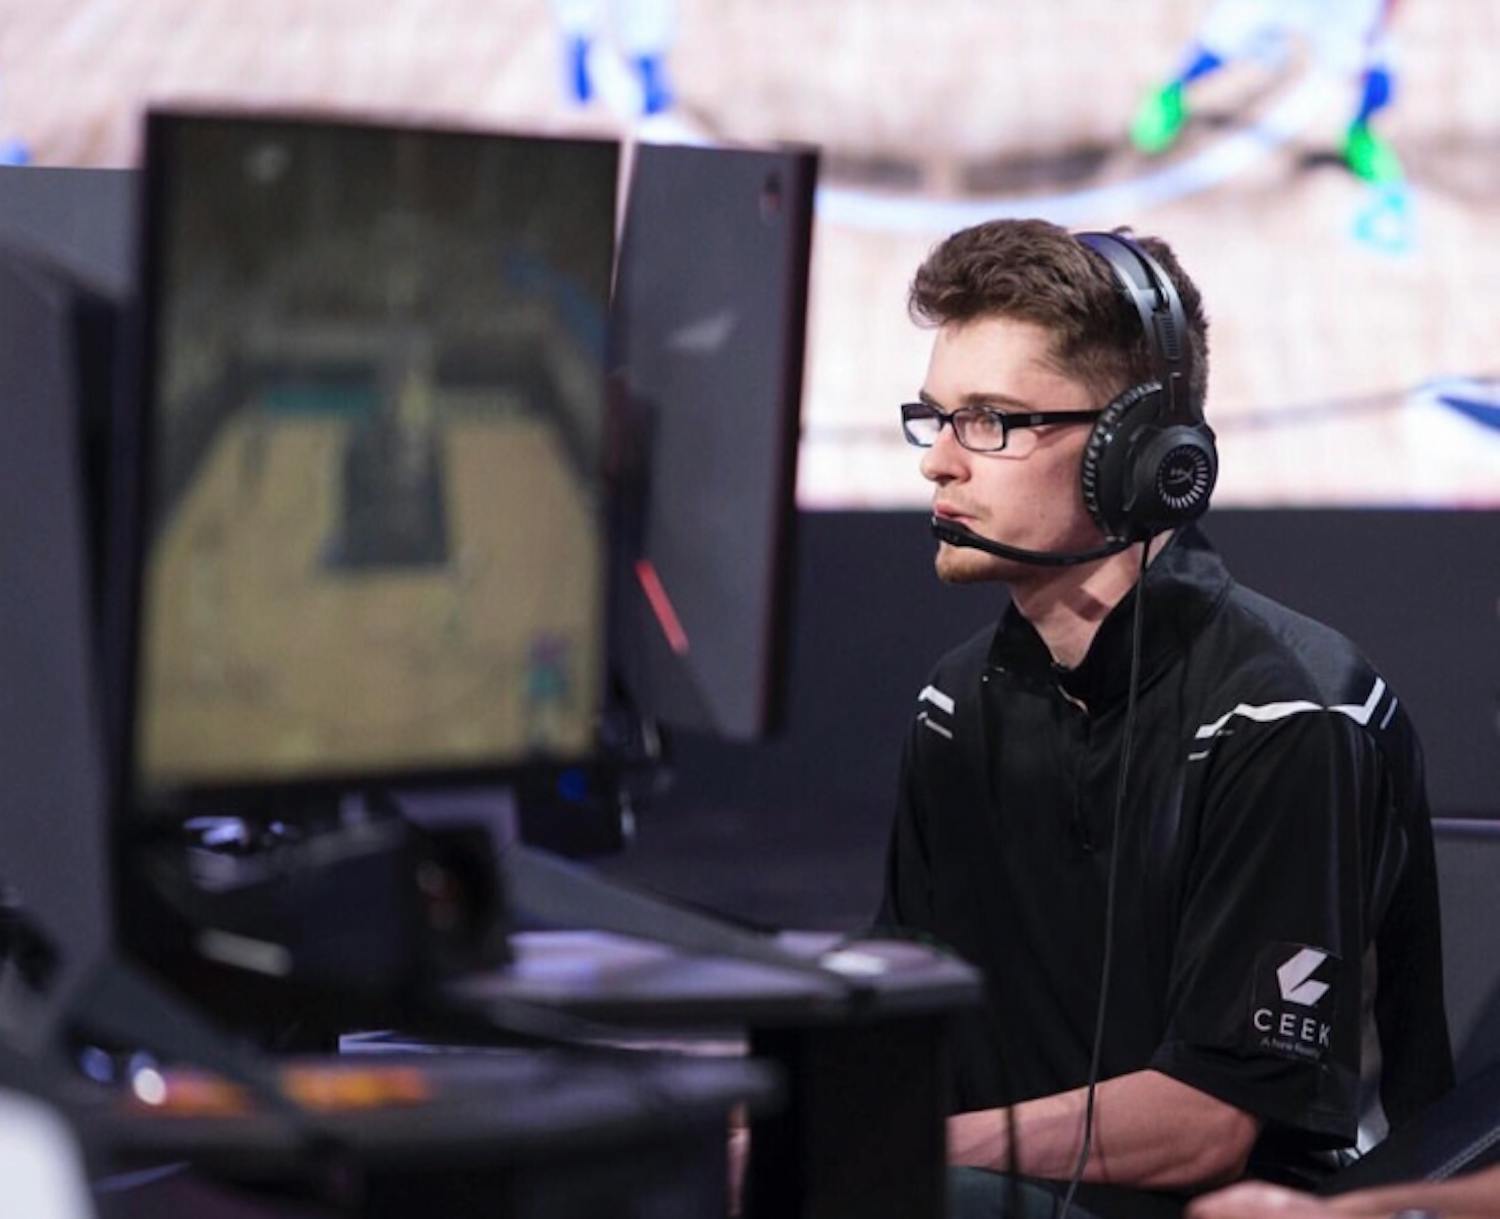 Chris Cantrell, also known by his gamertag KontruL on Playstation, was drafted by Magic Gaming with the eighth pick in the inaugural 2018 NBA 2K League Draft.
&nbsp;